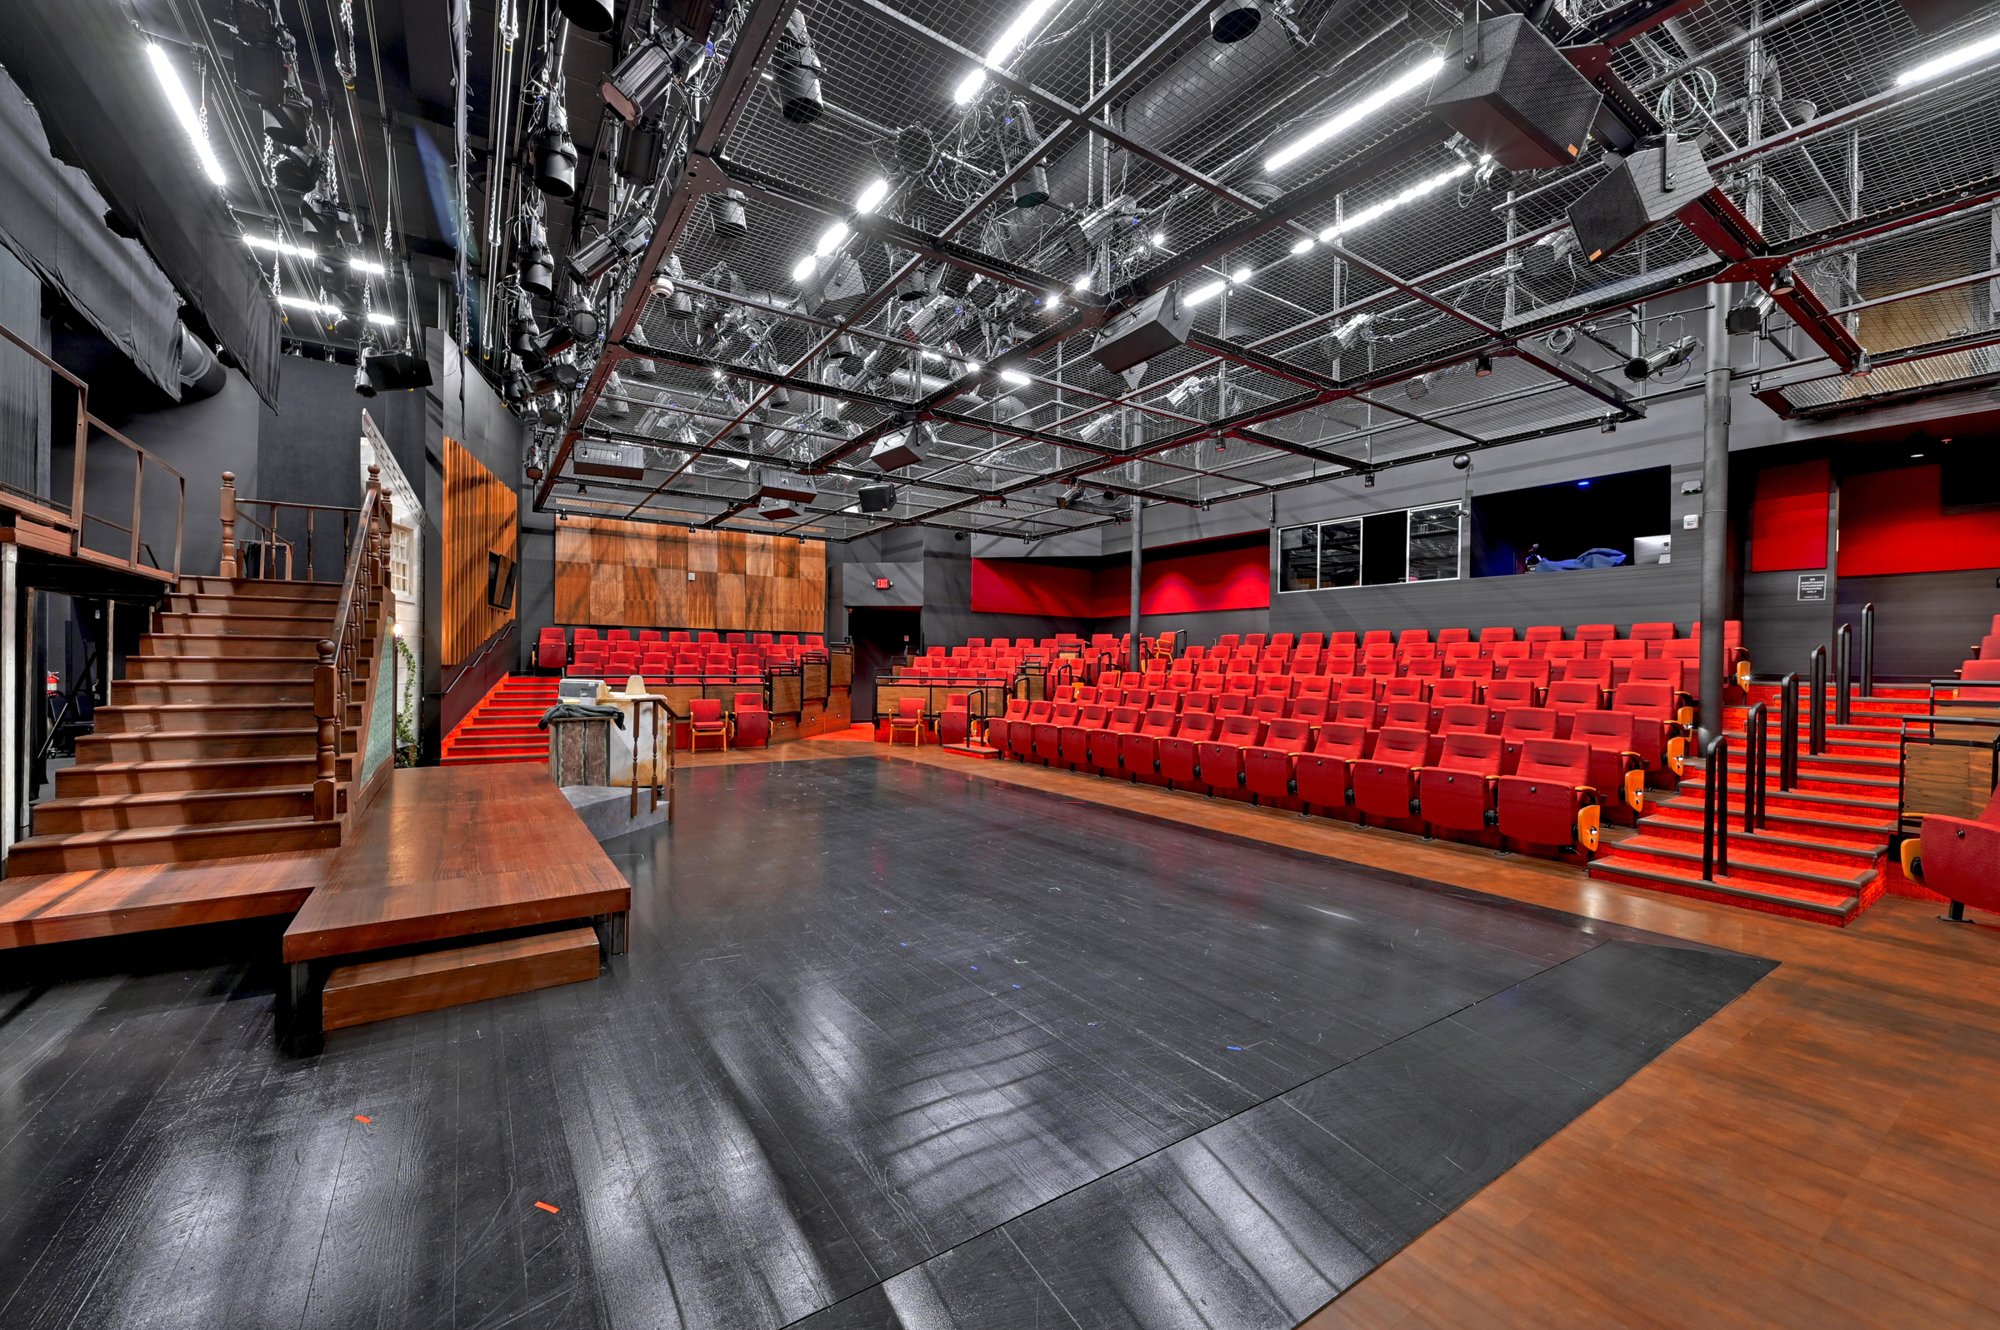 Westcoast Black Theatre Troupe's was only in its second production in its renovated theater